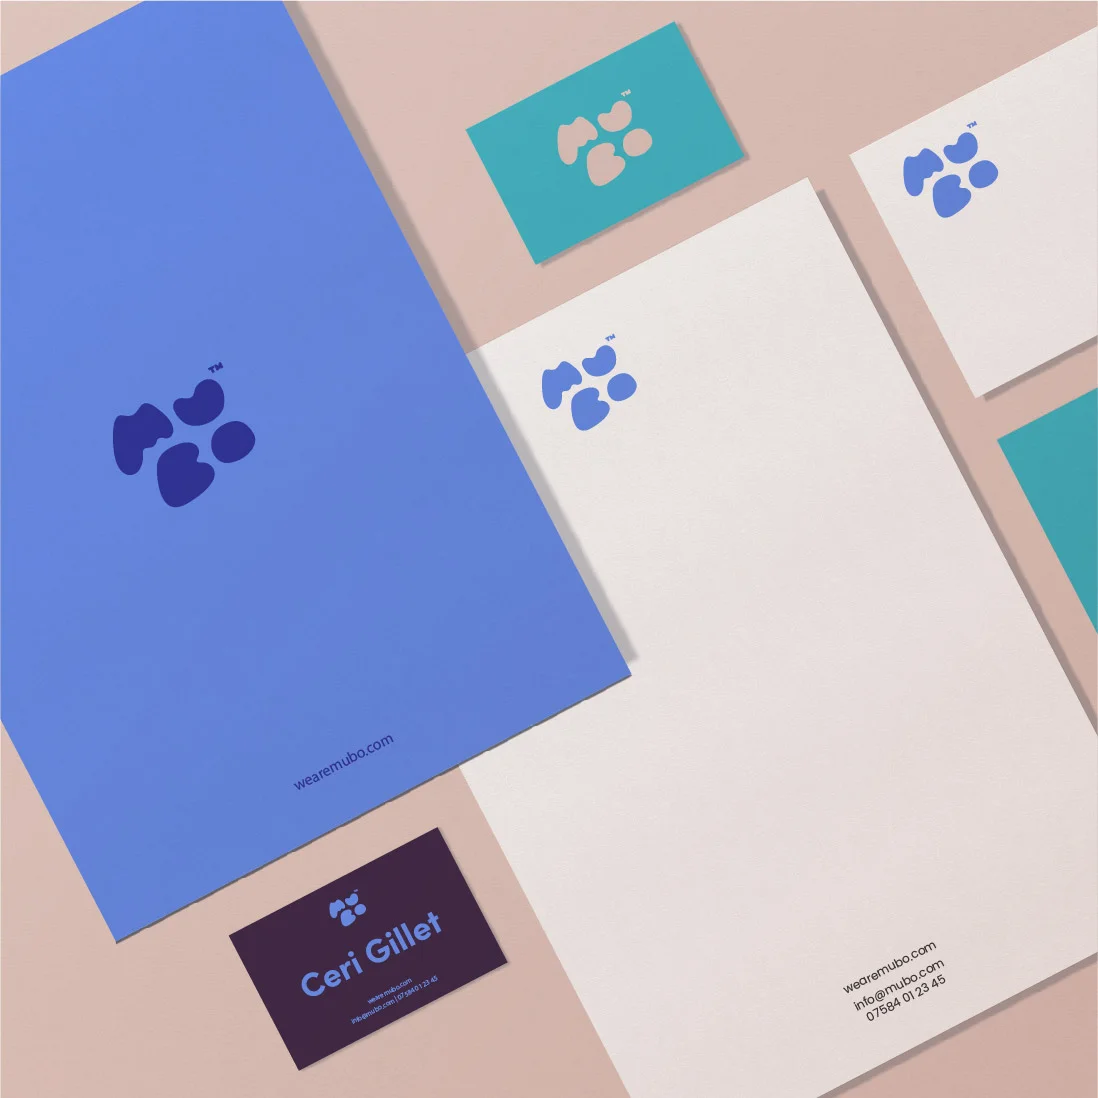 A flat lay of brand design materials in blue and white, including business cards, letterheads, and envelopes, each featuring a paw print logo.